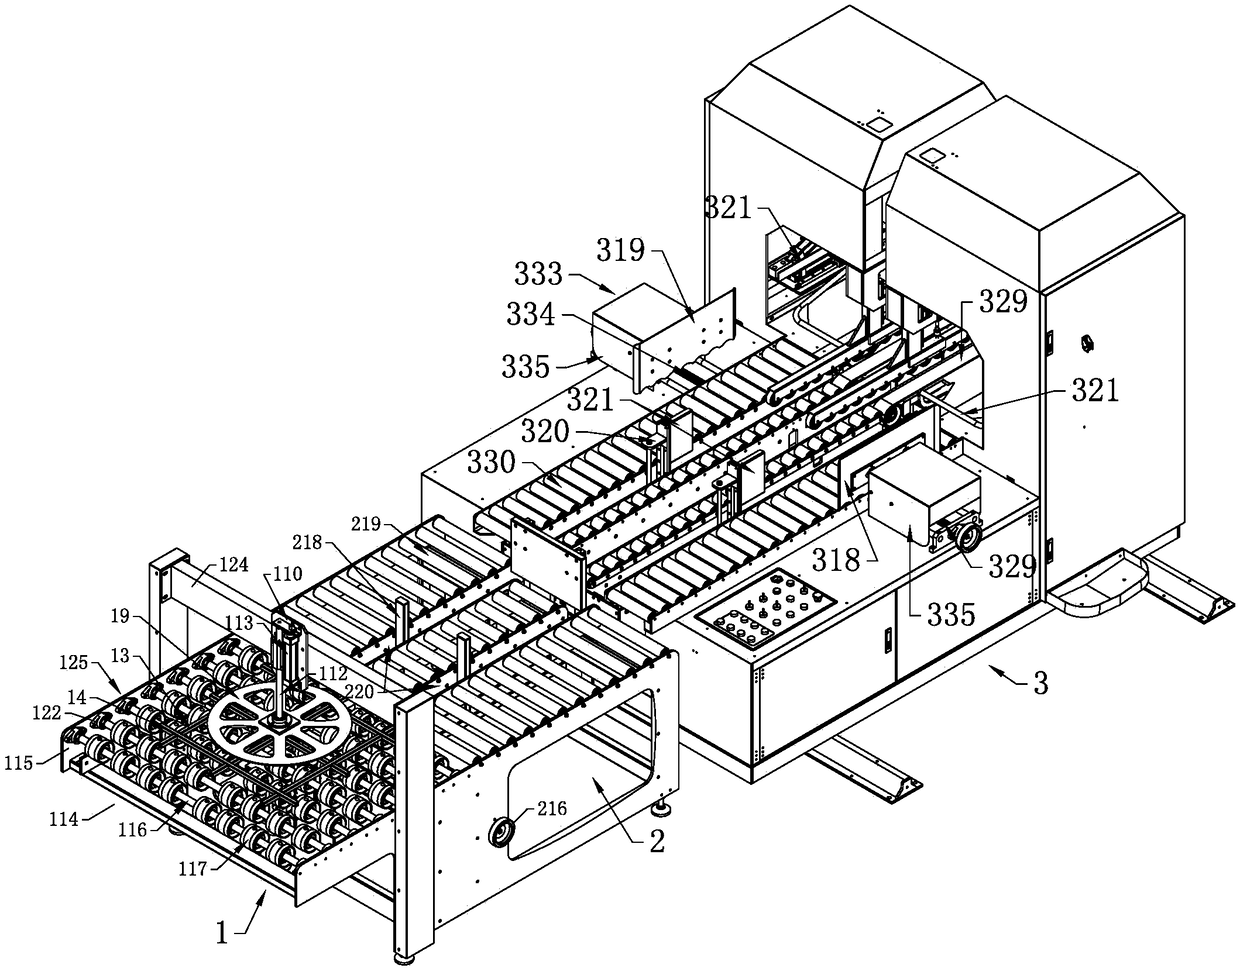 Full-automatic carton packing and stacking system